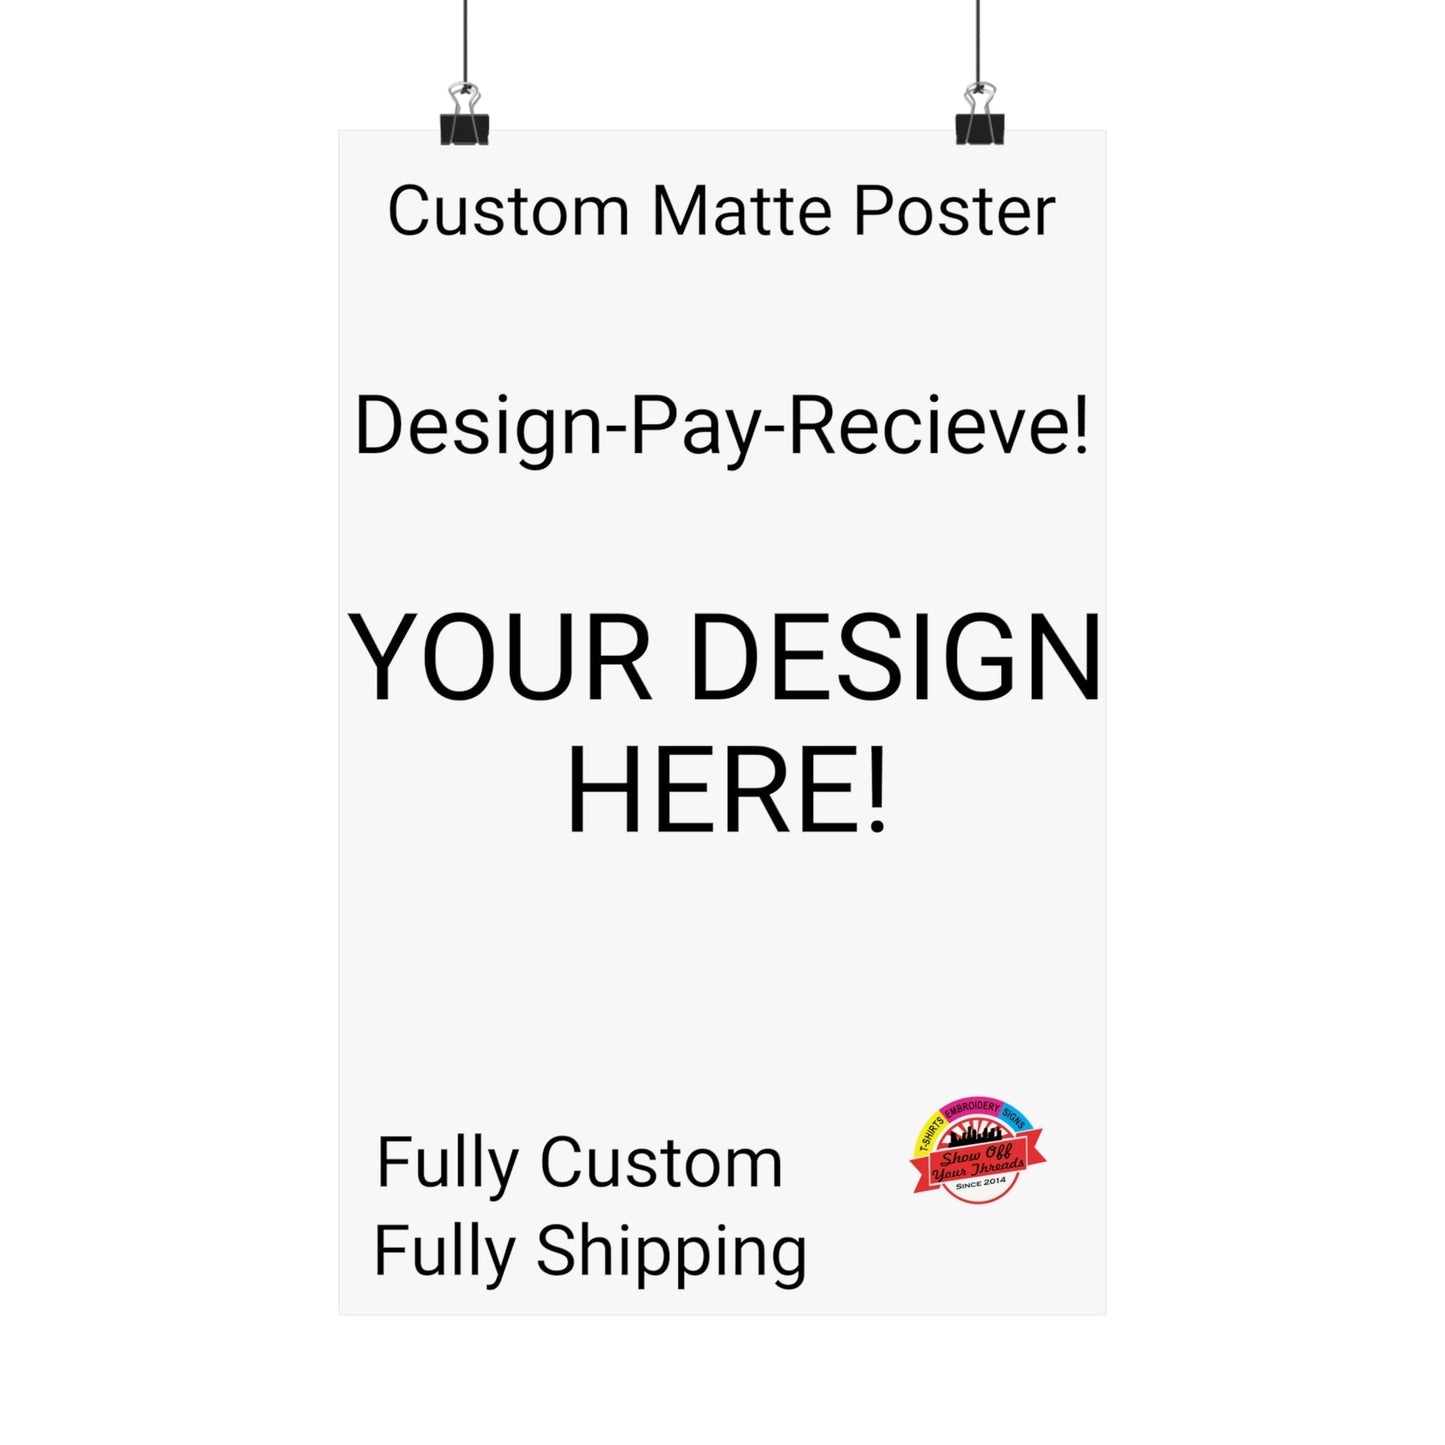 Custom Office Posters for Workplace Communication - Enhance Your Office Environment